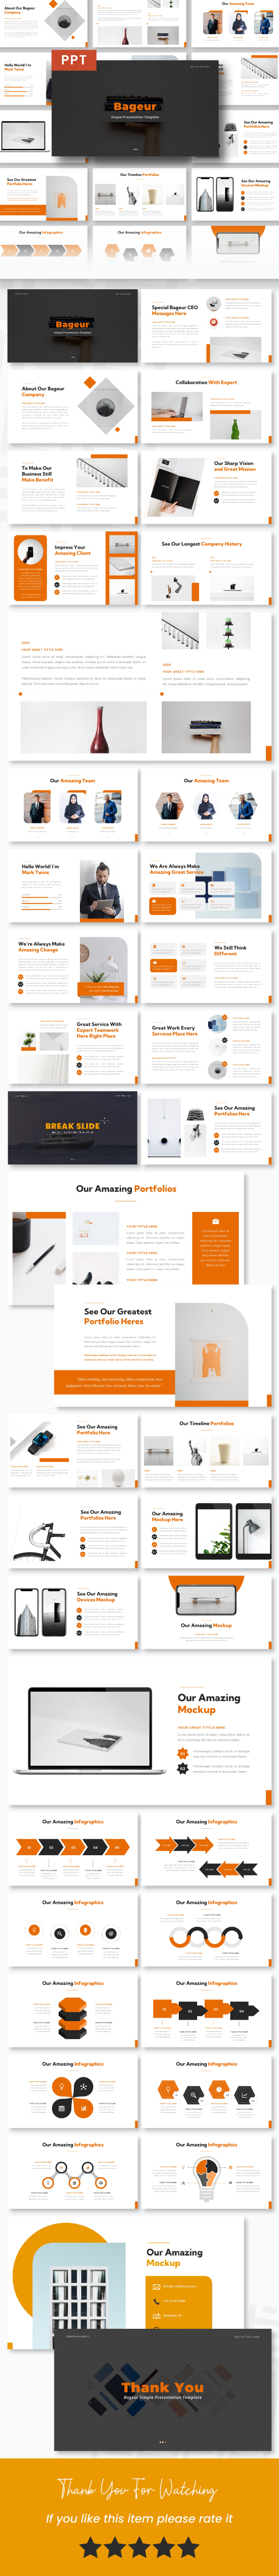 [DOWNLOAD]Bageur - Business PowerPoint Template